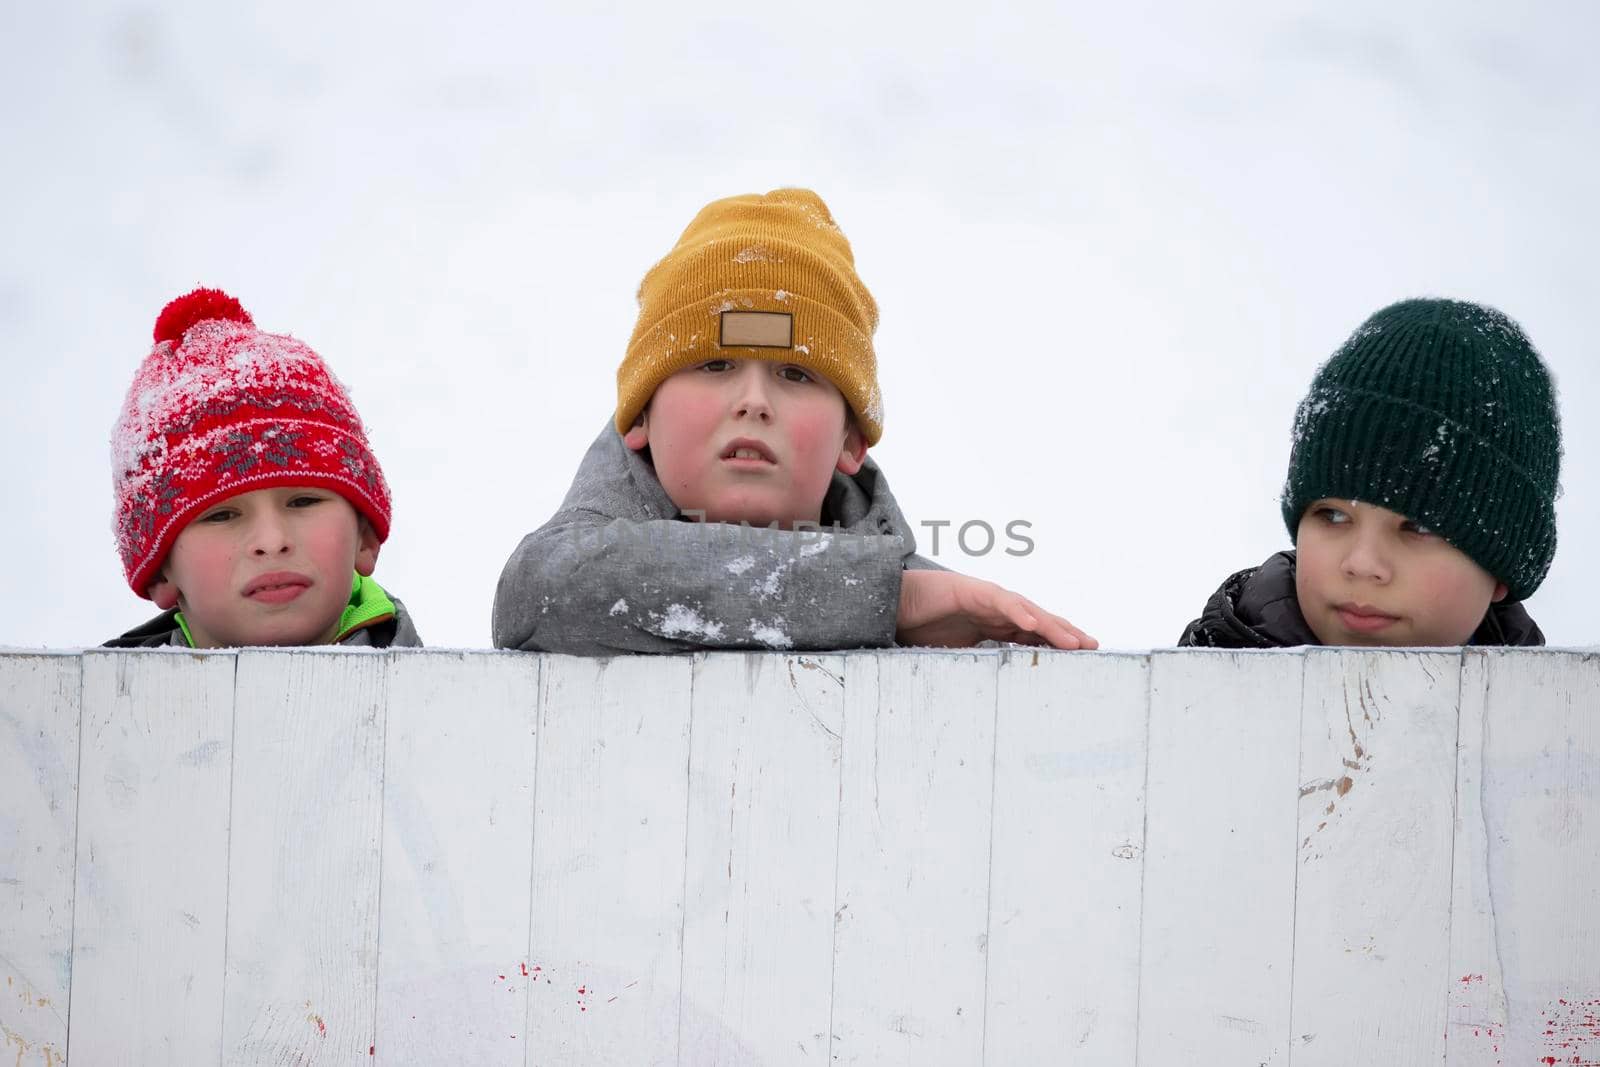 Three funny little boys are watching from behind the fence.